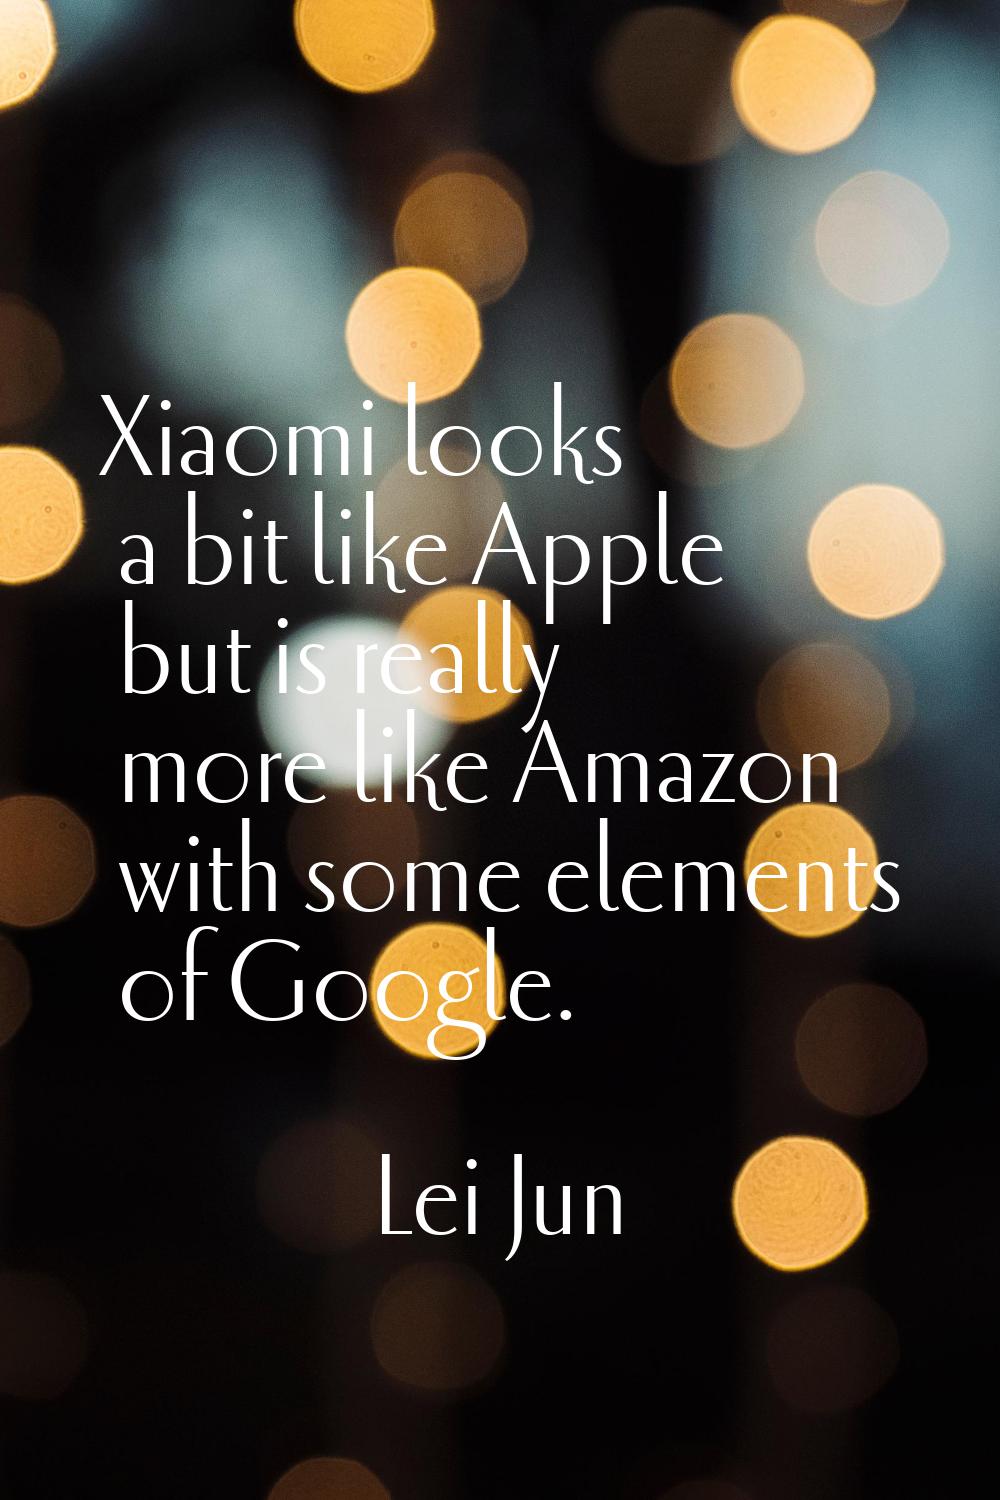 Xiaomi looks a bit like Apple but is really more like Amazon with some elements of Google.